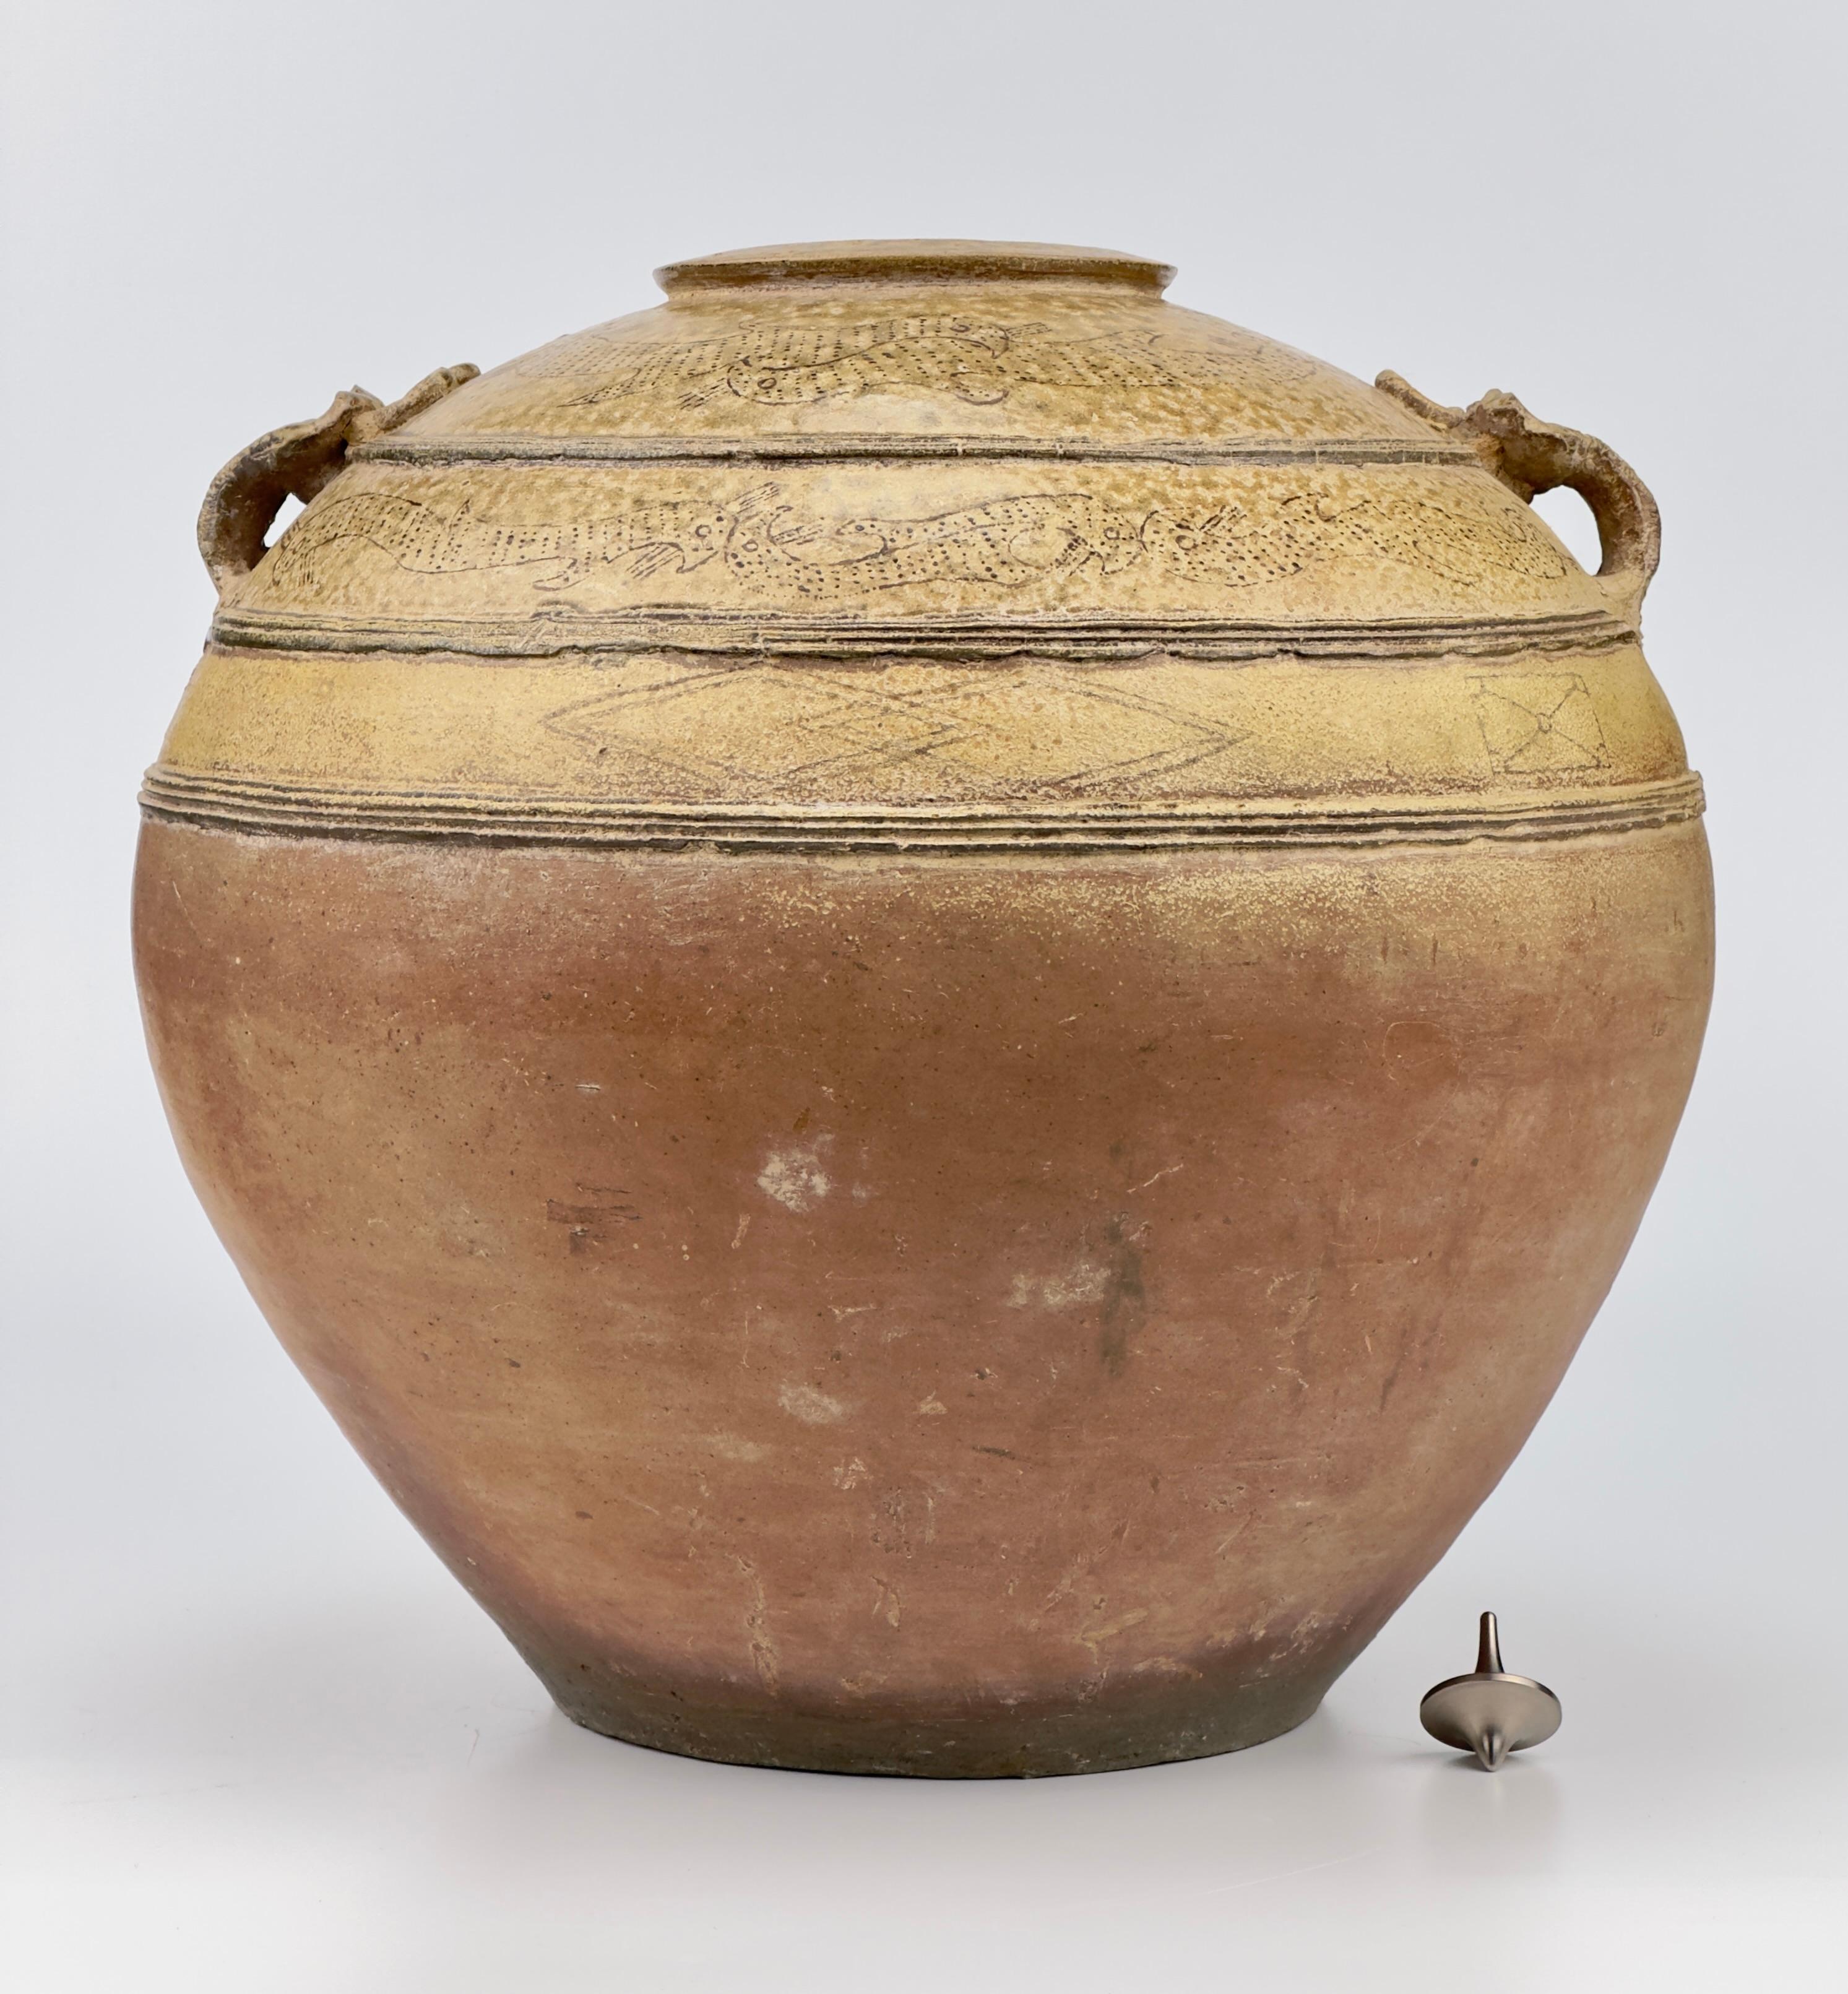 Robustly crafted with a voluminous spherical body and a layered mouth rim, this jar features a pair of taotie handles. It is adorned with three horizontal bands on the upper half of the olive-green-glazed body, which segment the glazed area into